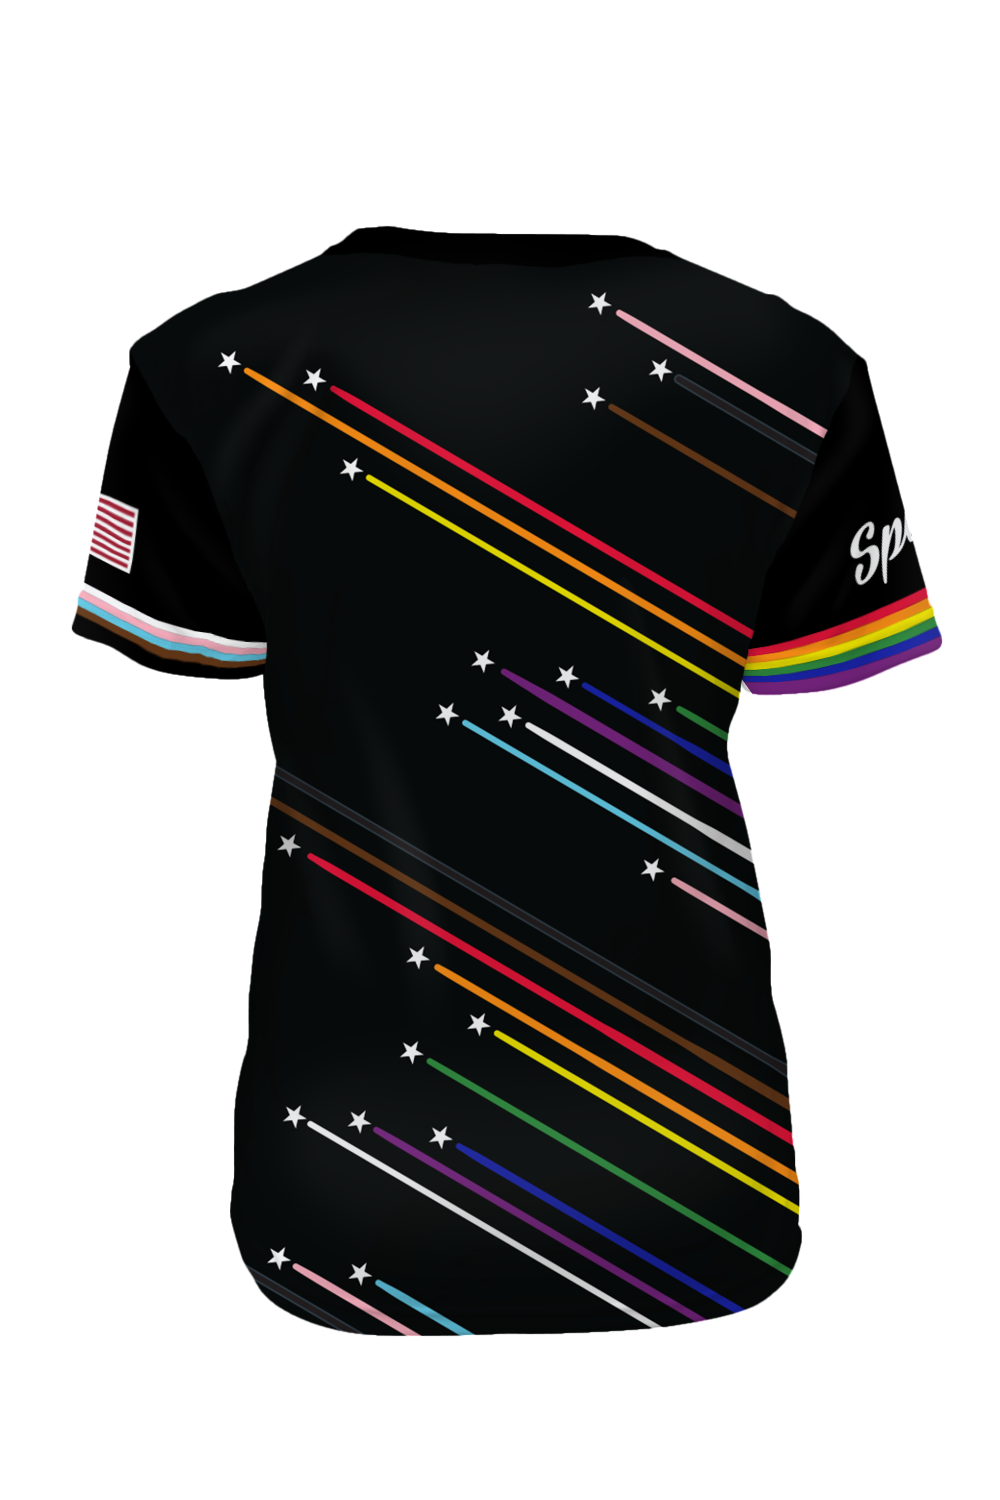 USNT Special Edition Short Sleeve Jersey